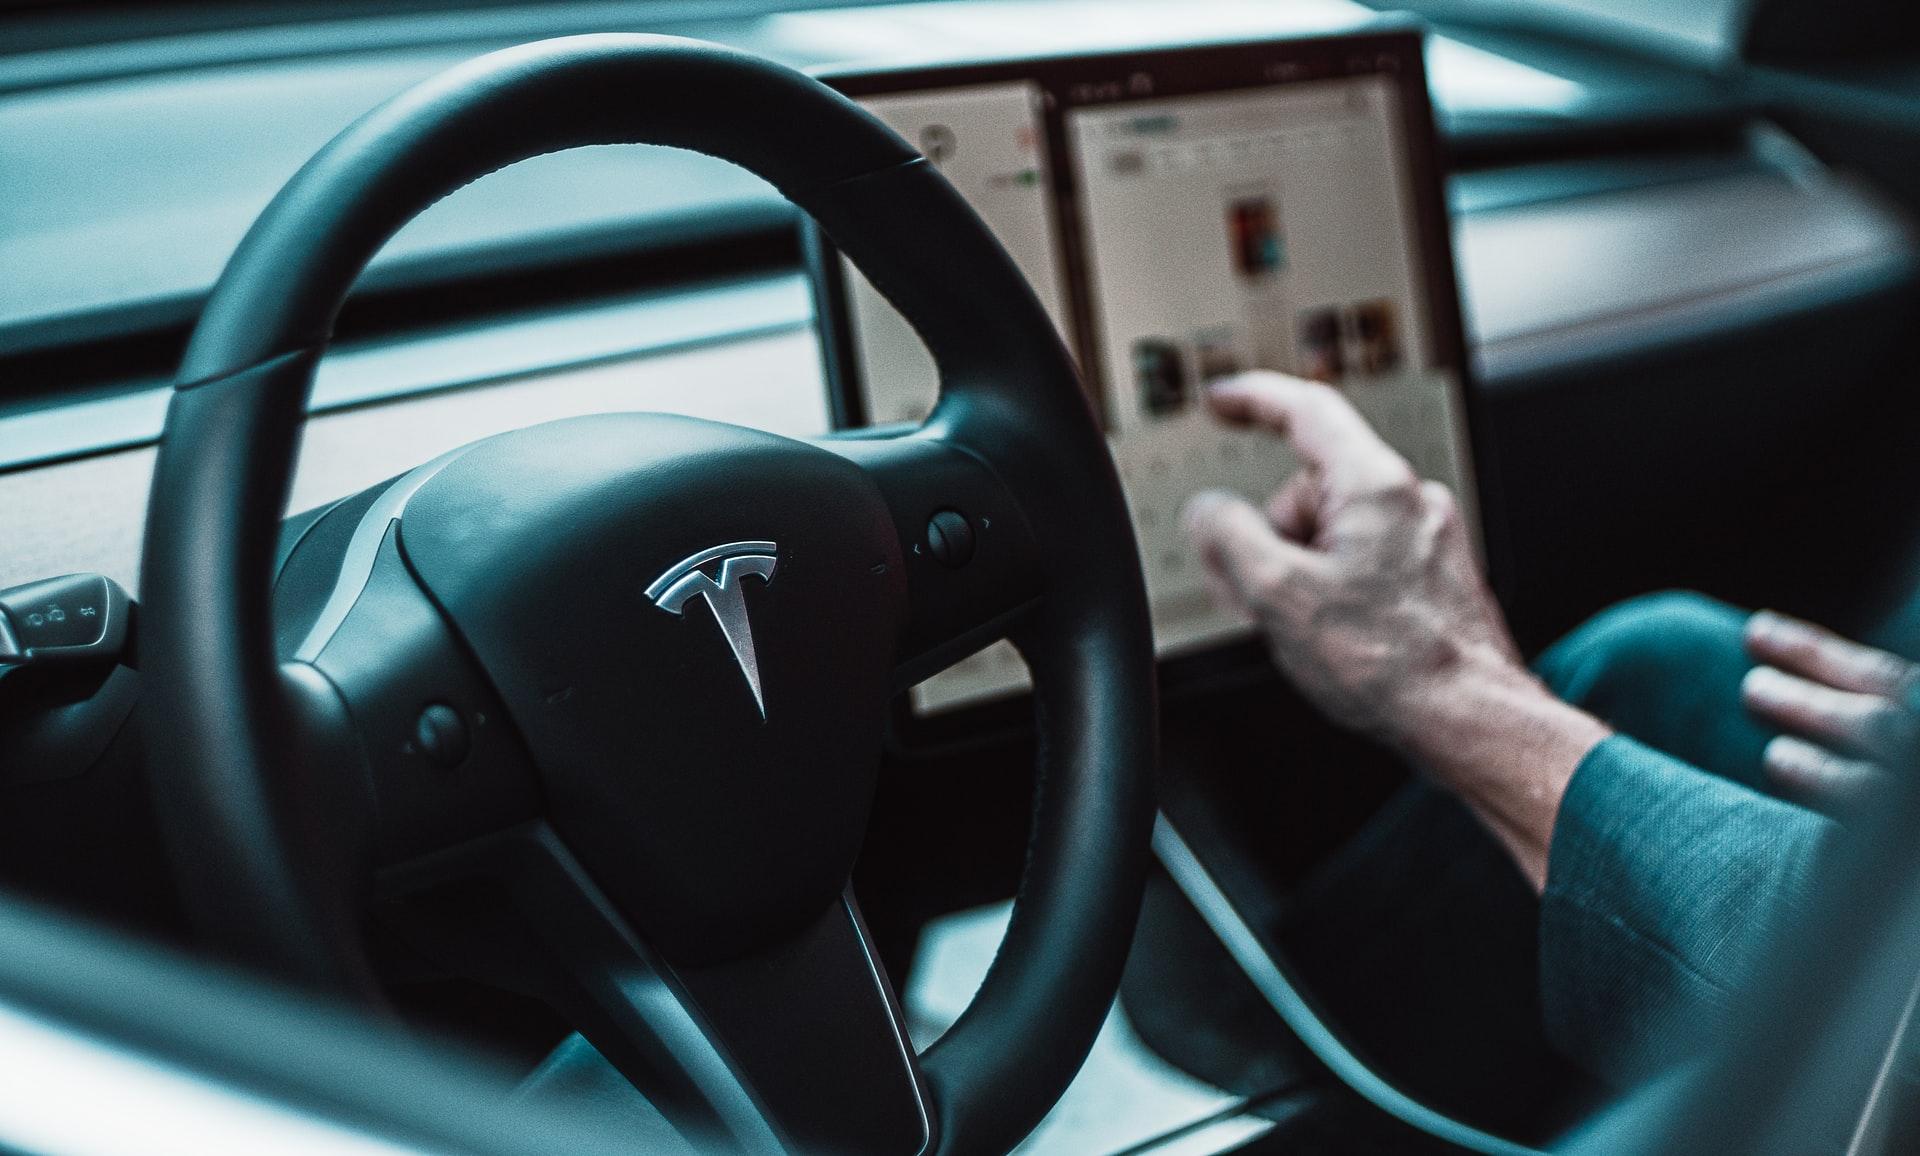 Tesla has released its safety score to help curb unsafe driving habits.